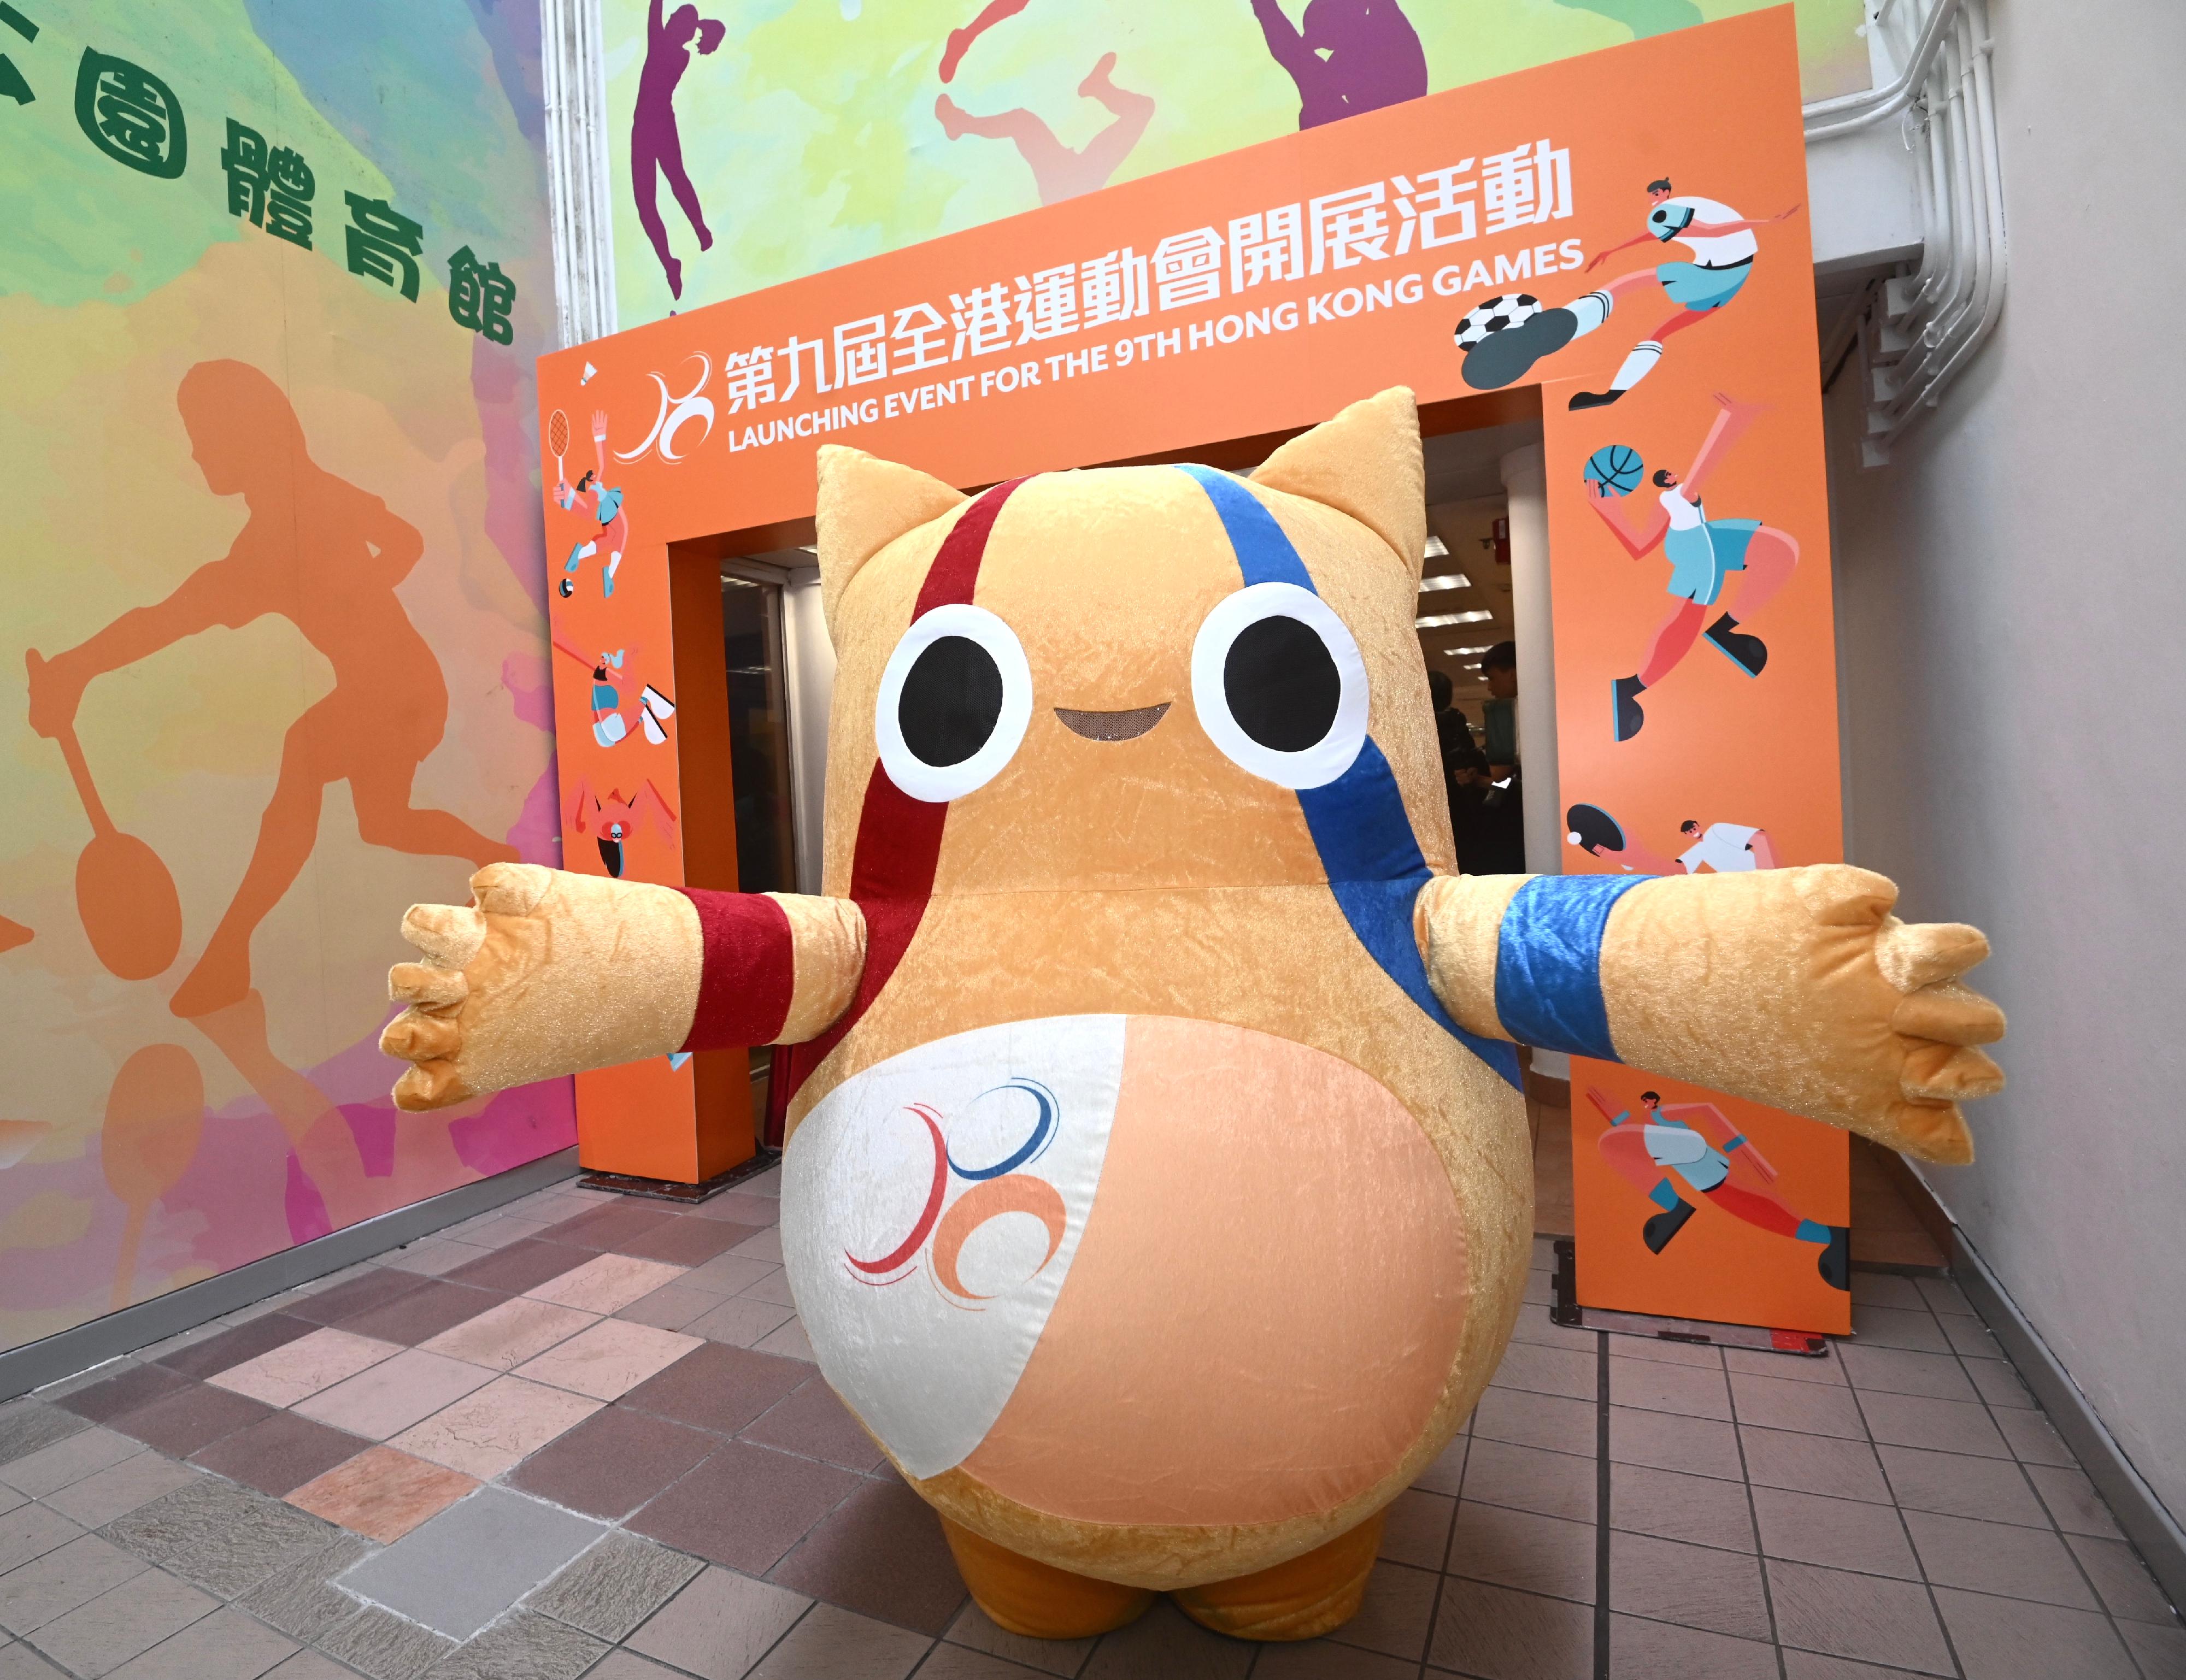 The 9th Hong Kong Games (HKG) will be held in 2023 and 2024, while athlete selection competitions in 18 districts will start from July this year. Members of the public are encouraged to join and represent their districts to compete in the Games. Photo shows the mascot of the HKG, Cheering Larry. 